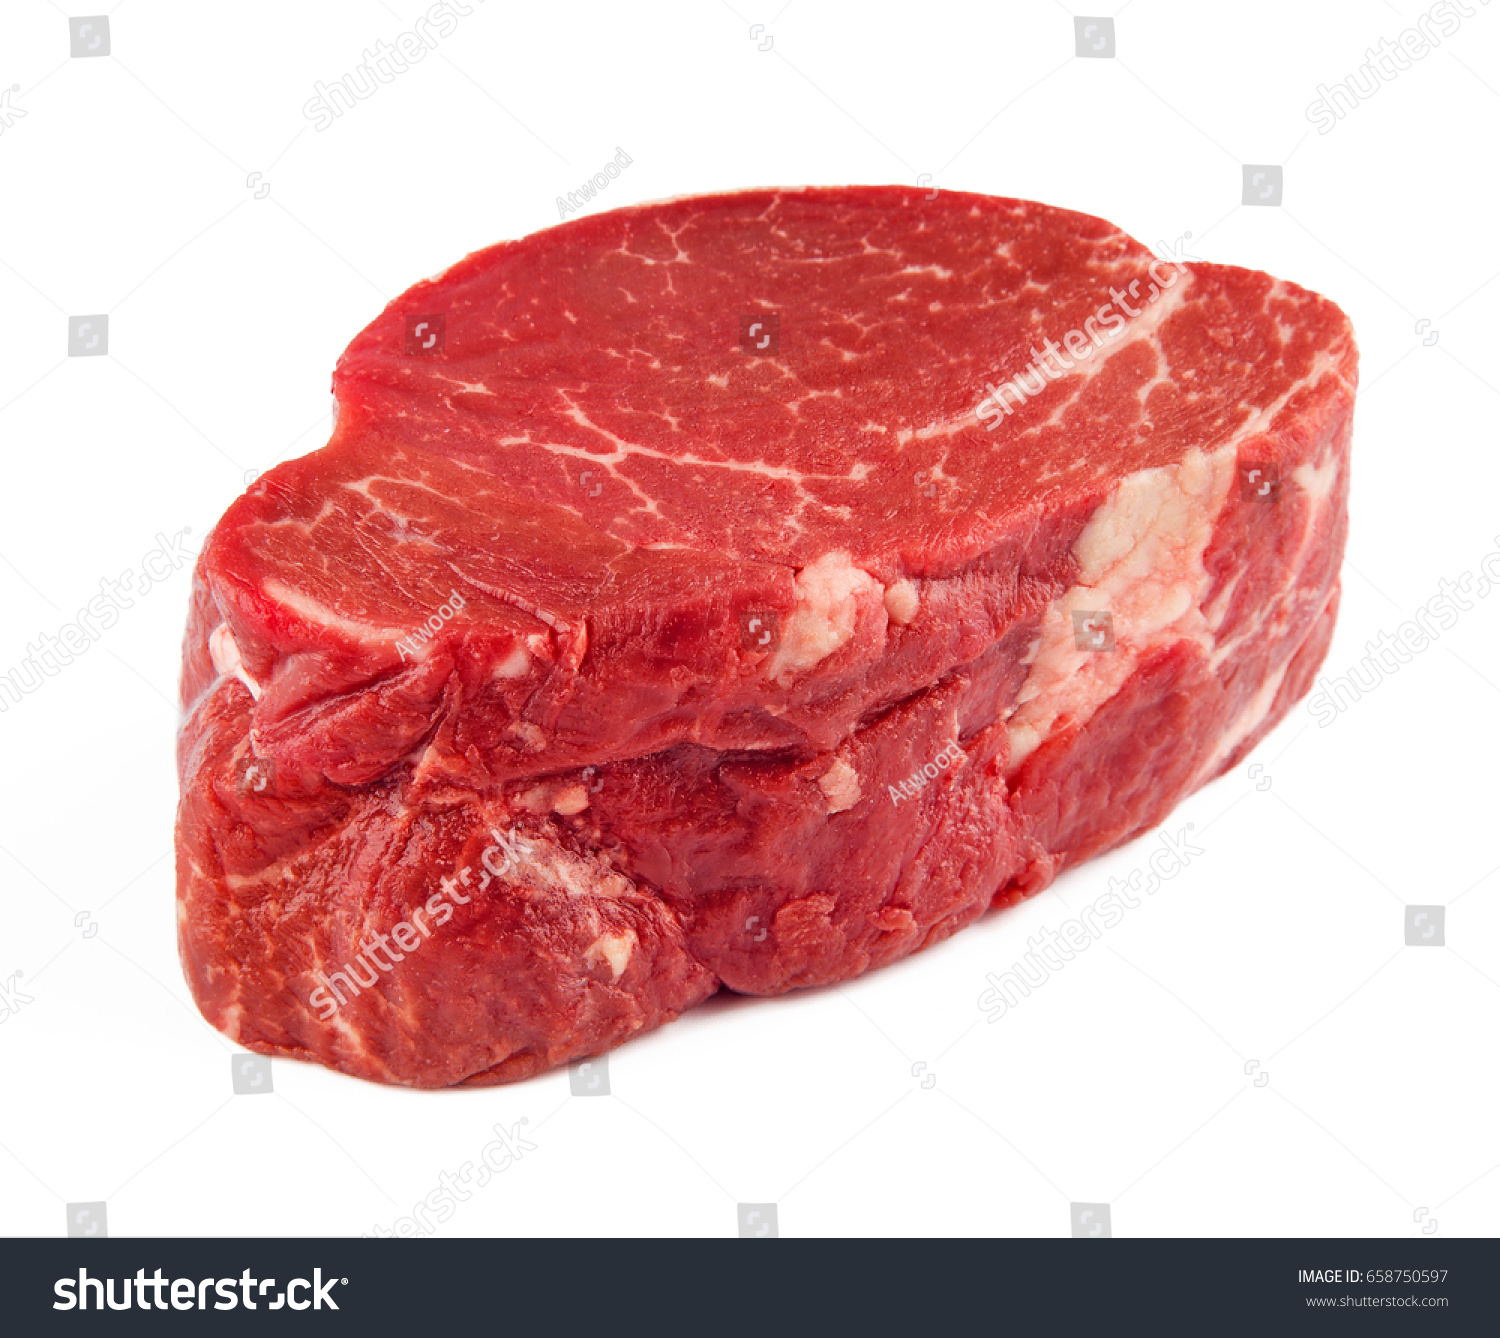 Close-up view of filet mignon isolated on white background. #658750597